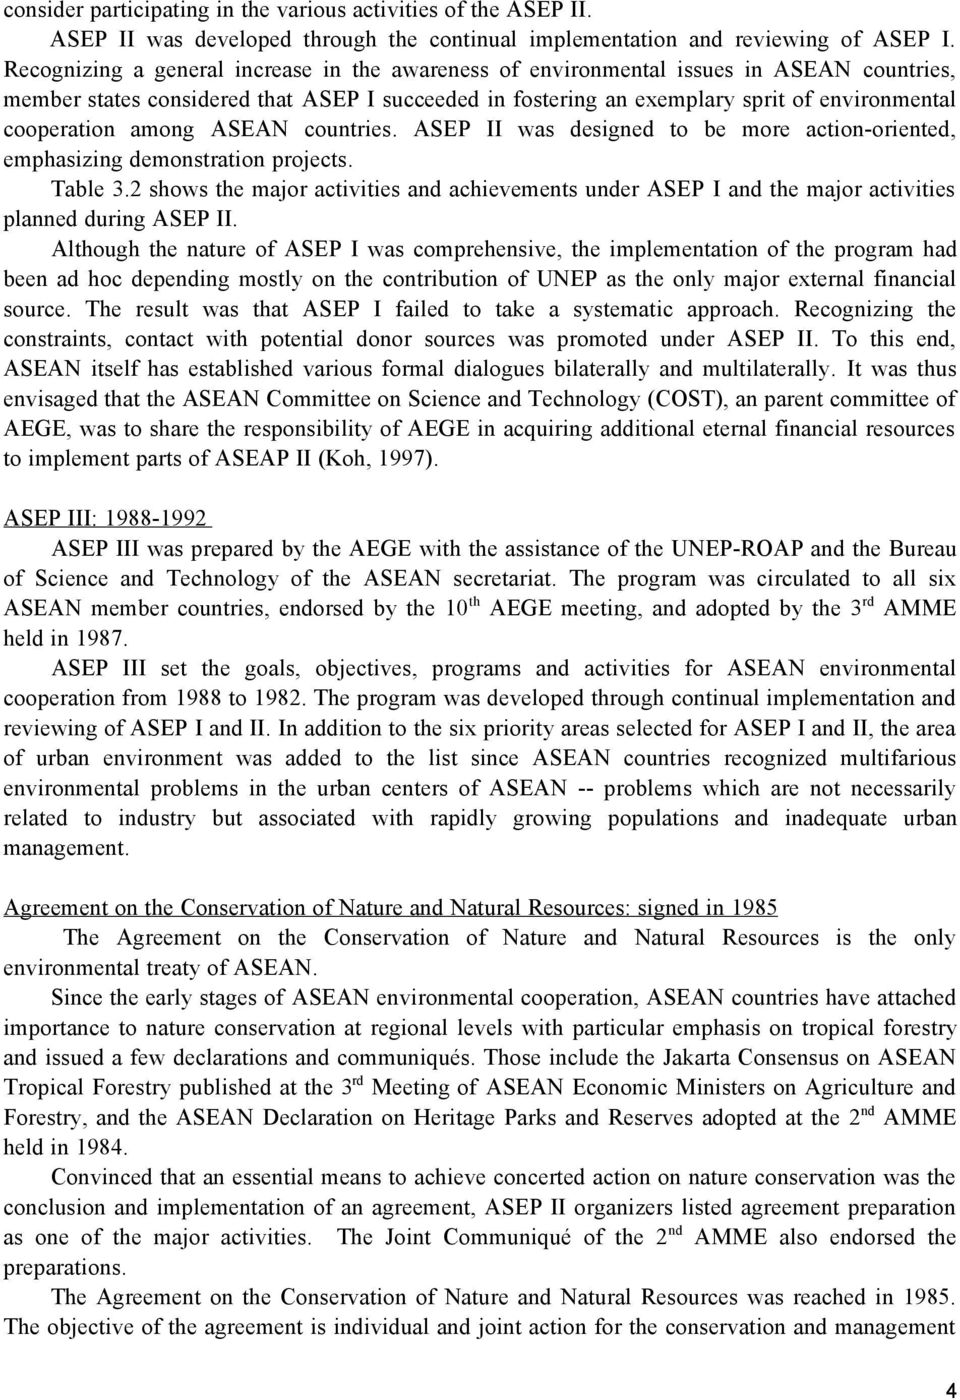 among ASEAN countries. ASEP II was designed to be more action-oriented, emphasizing demonstration projects. Table 3.